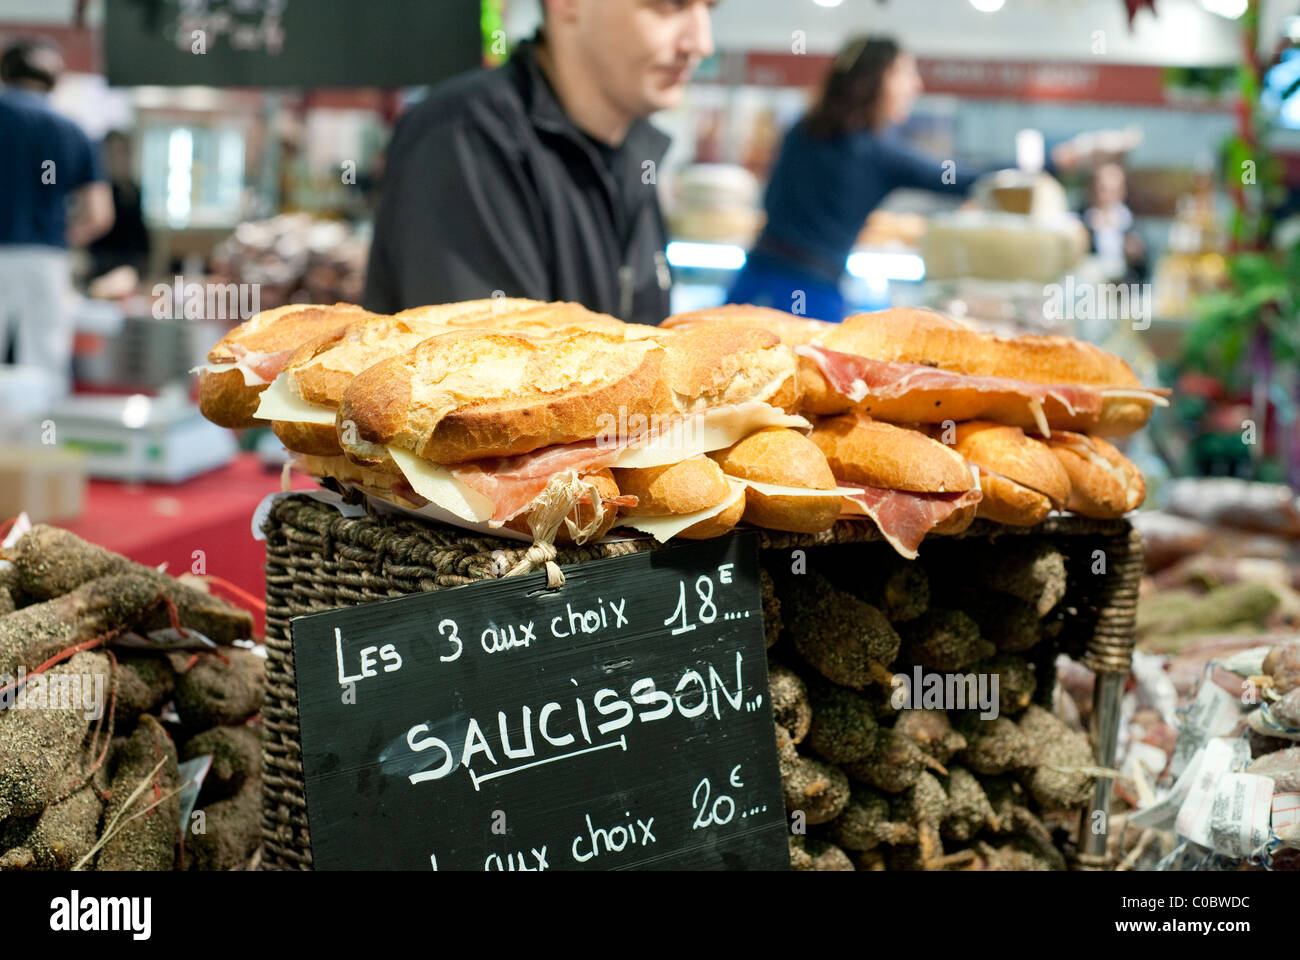 Paris, France - February 19, 2011 - Sandwiches with ham on sale at a public stand Stock Photo